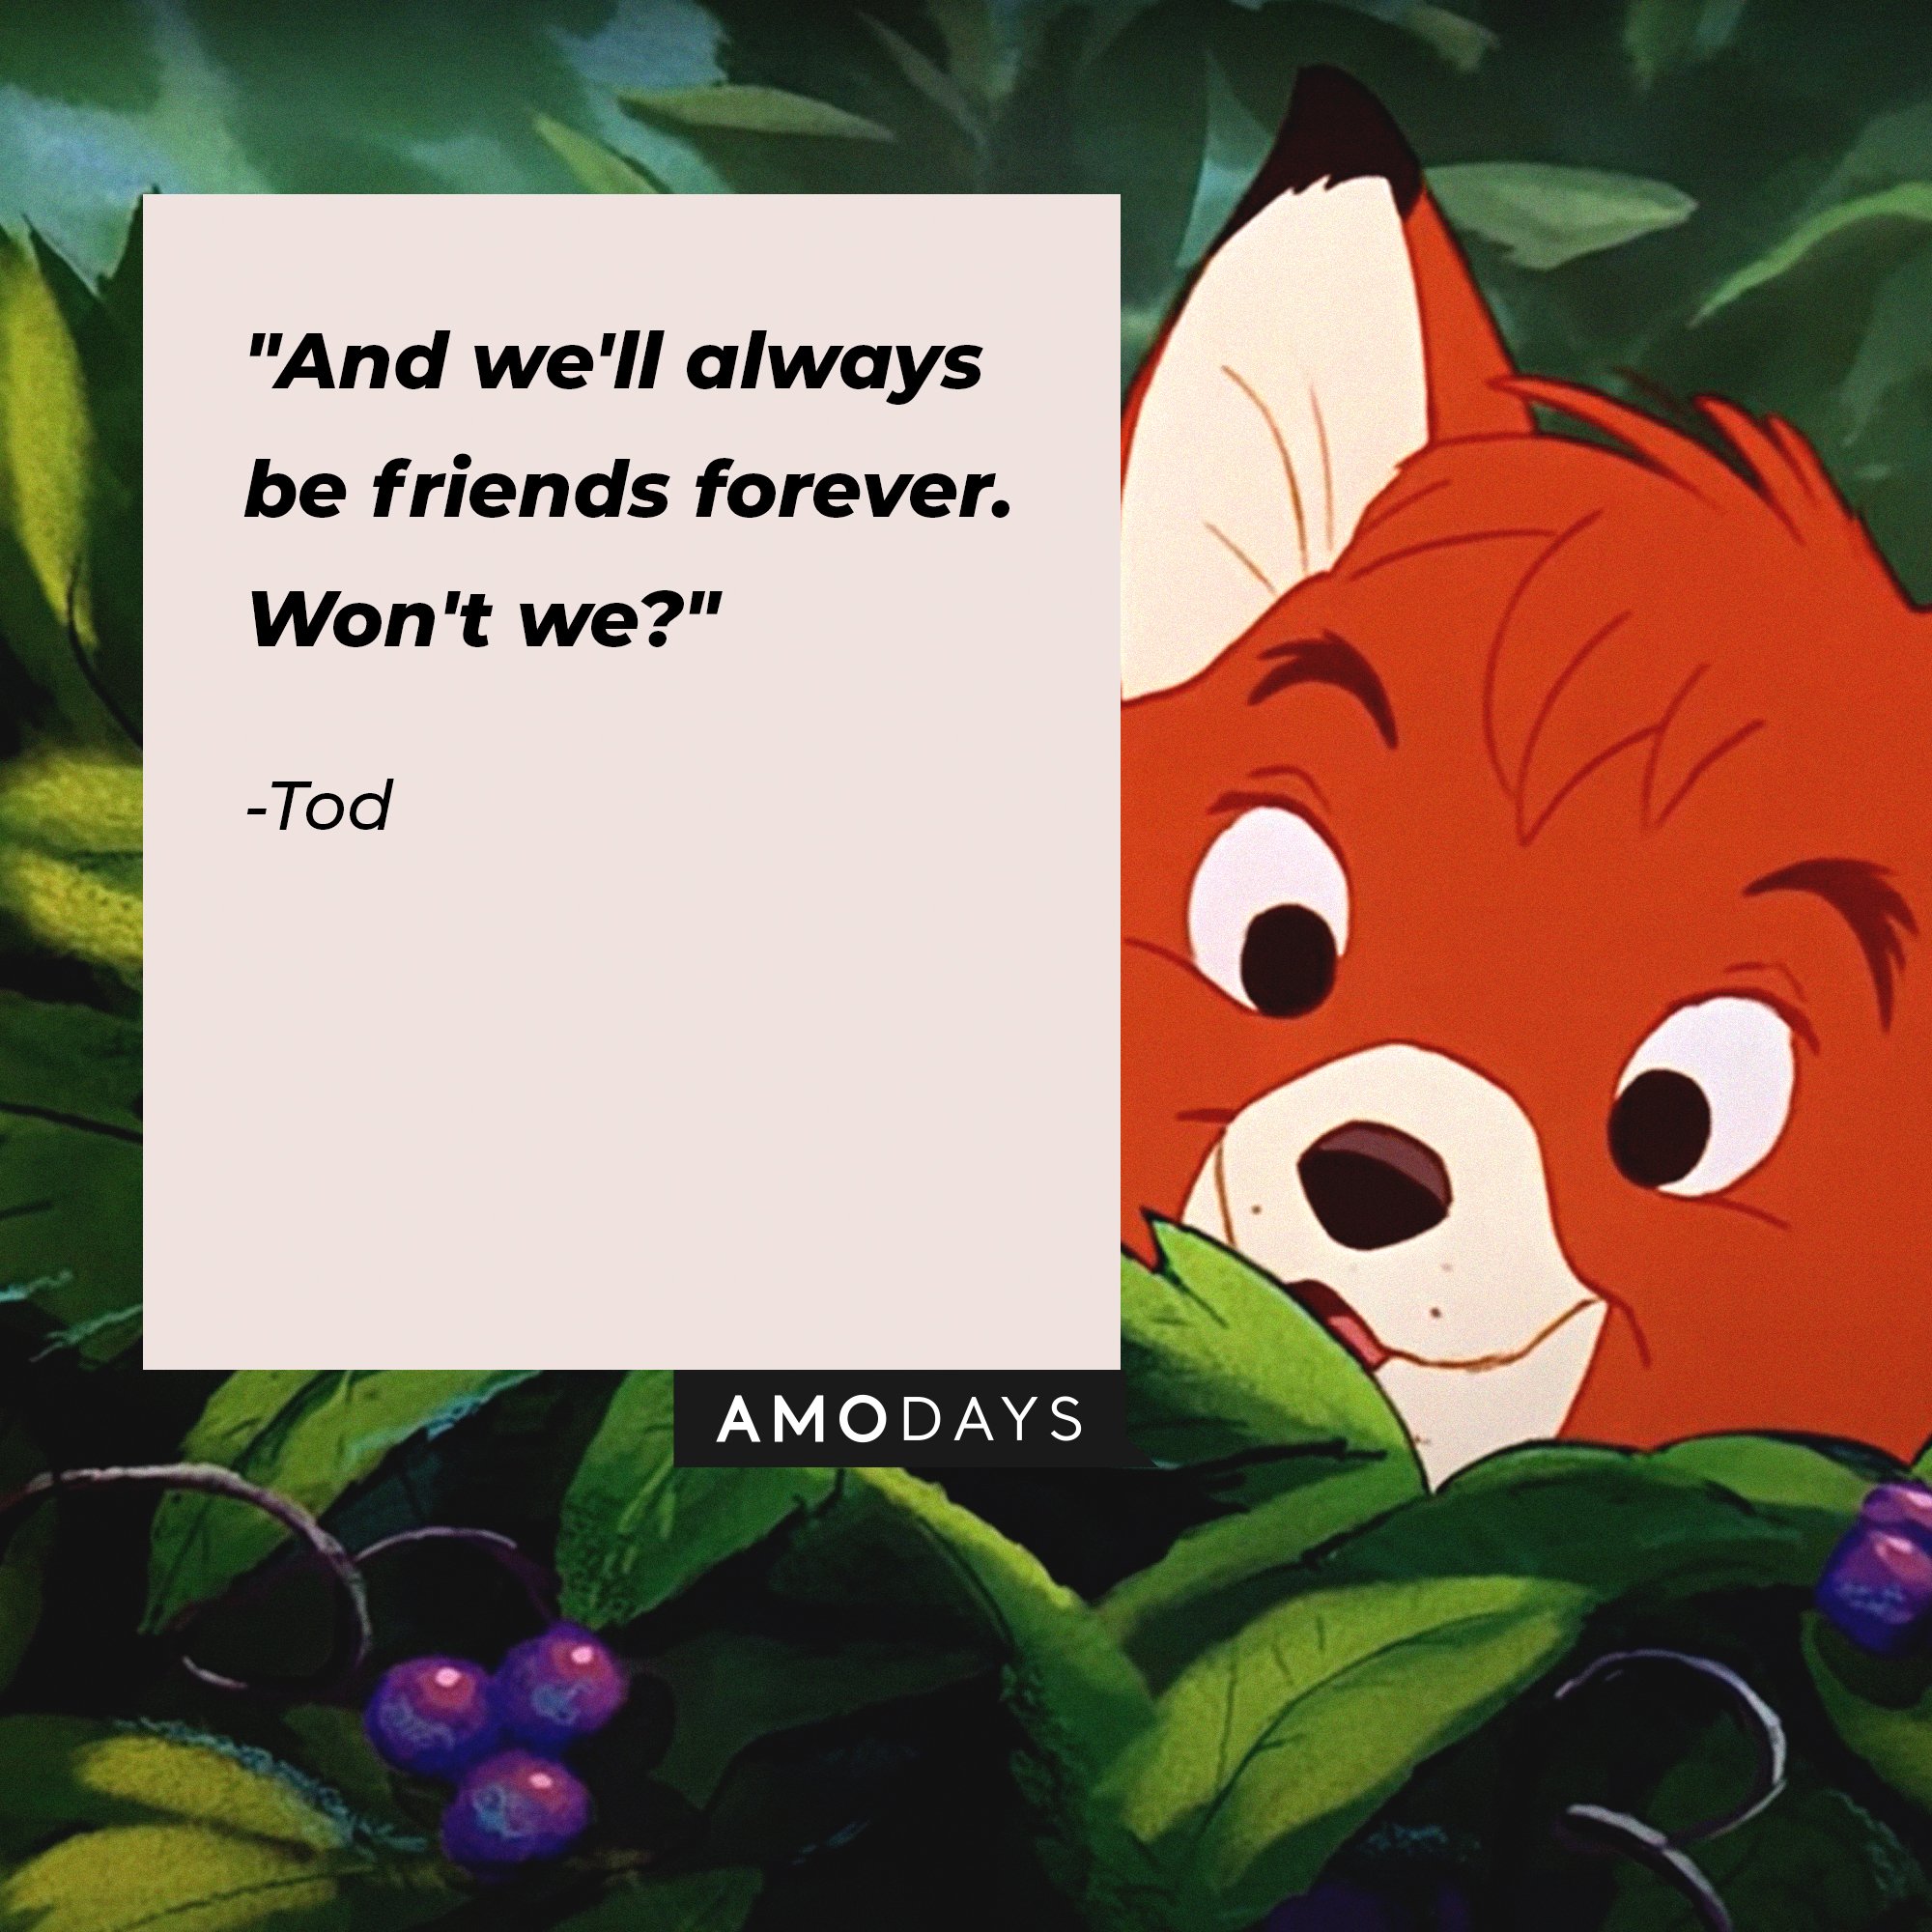 Tod’s quote: "And we'll always be friends forever. Won't we?" | Image: AmoDays